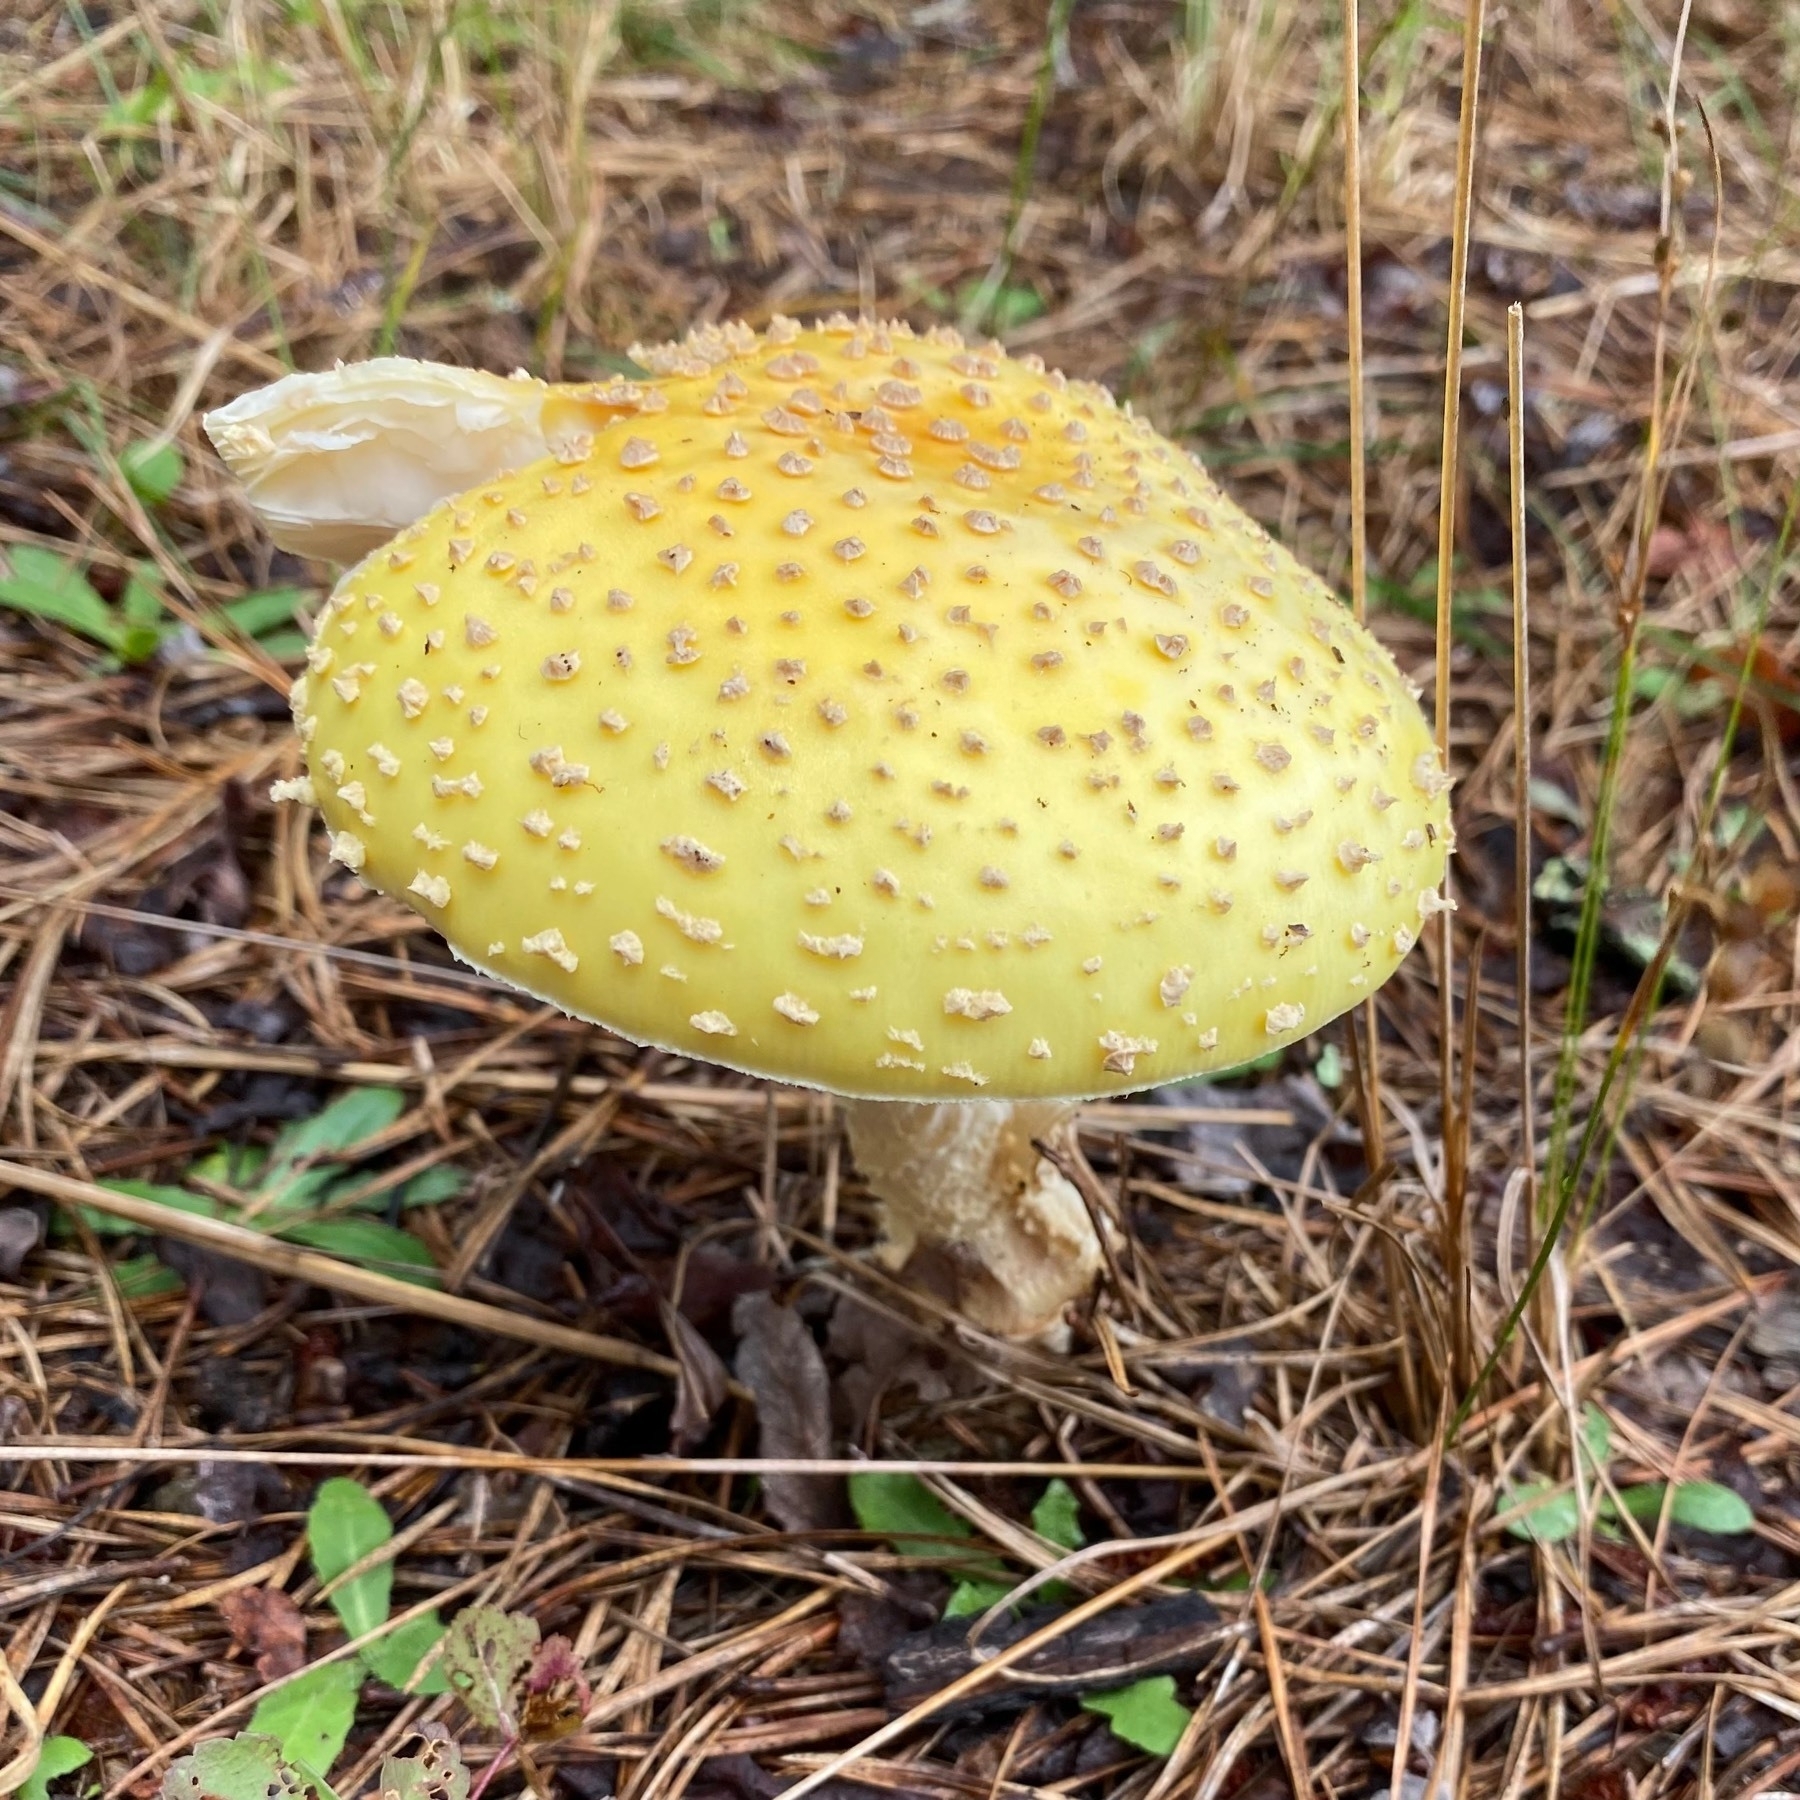 Bright yellow mushroom covered in brown spots growing through pine needles on the forest floor.